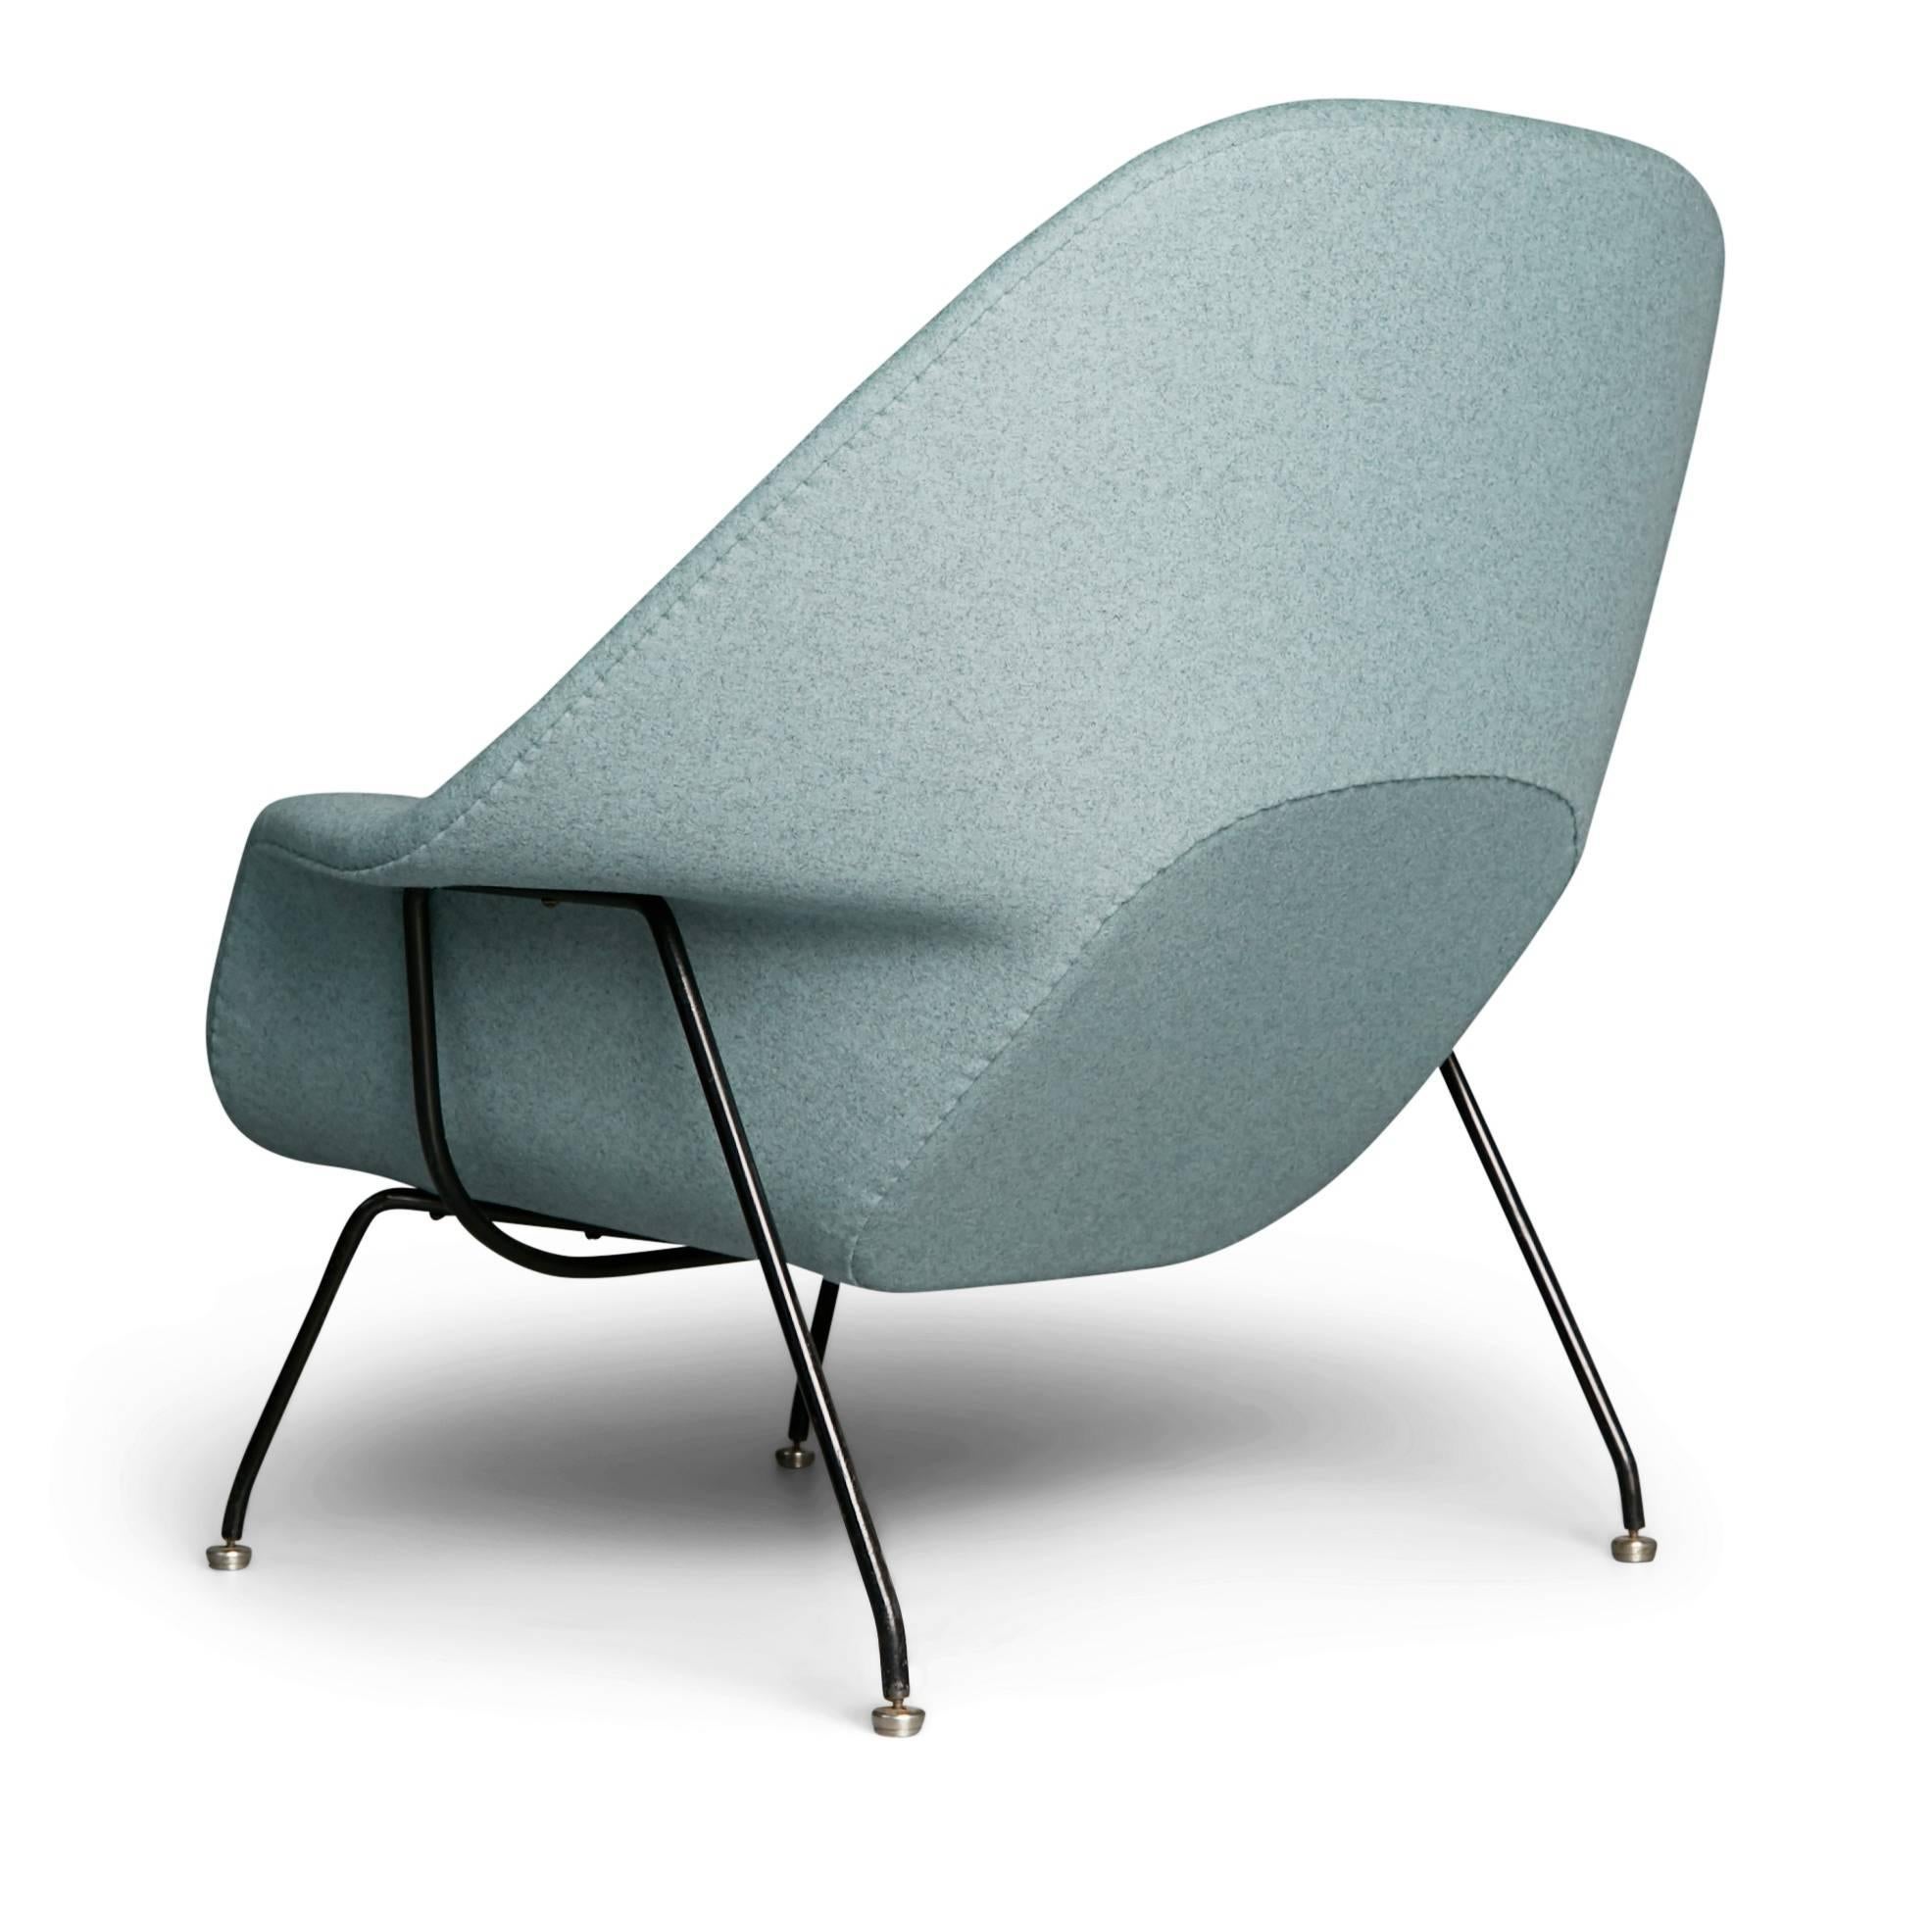 Mid-20th Century Newly Upholstered Womb Chair and Ottoman by Eero Saarinen for Knoll, circa 1950